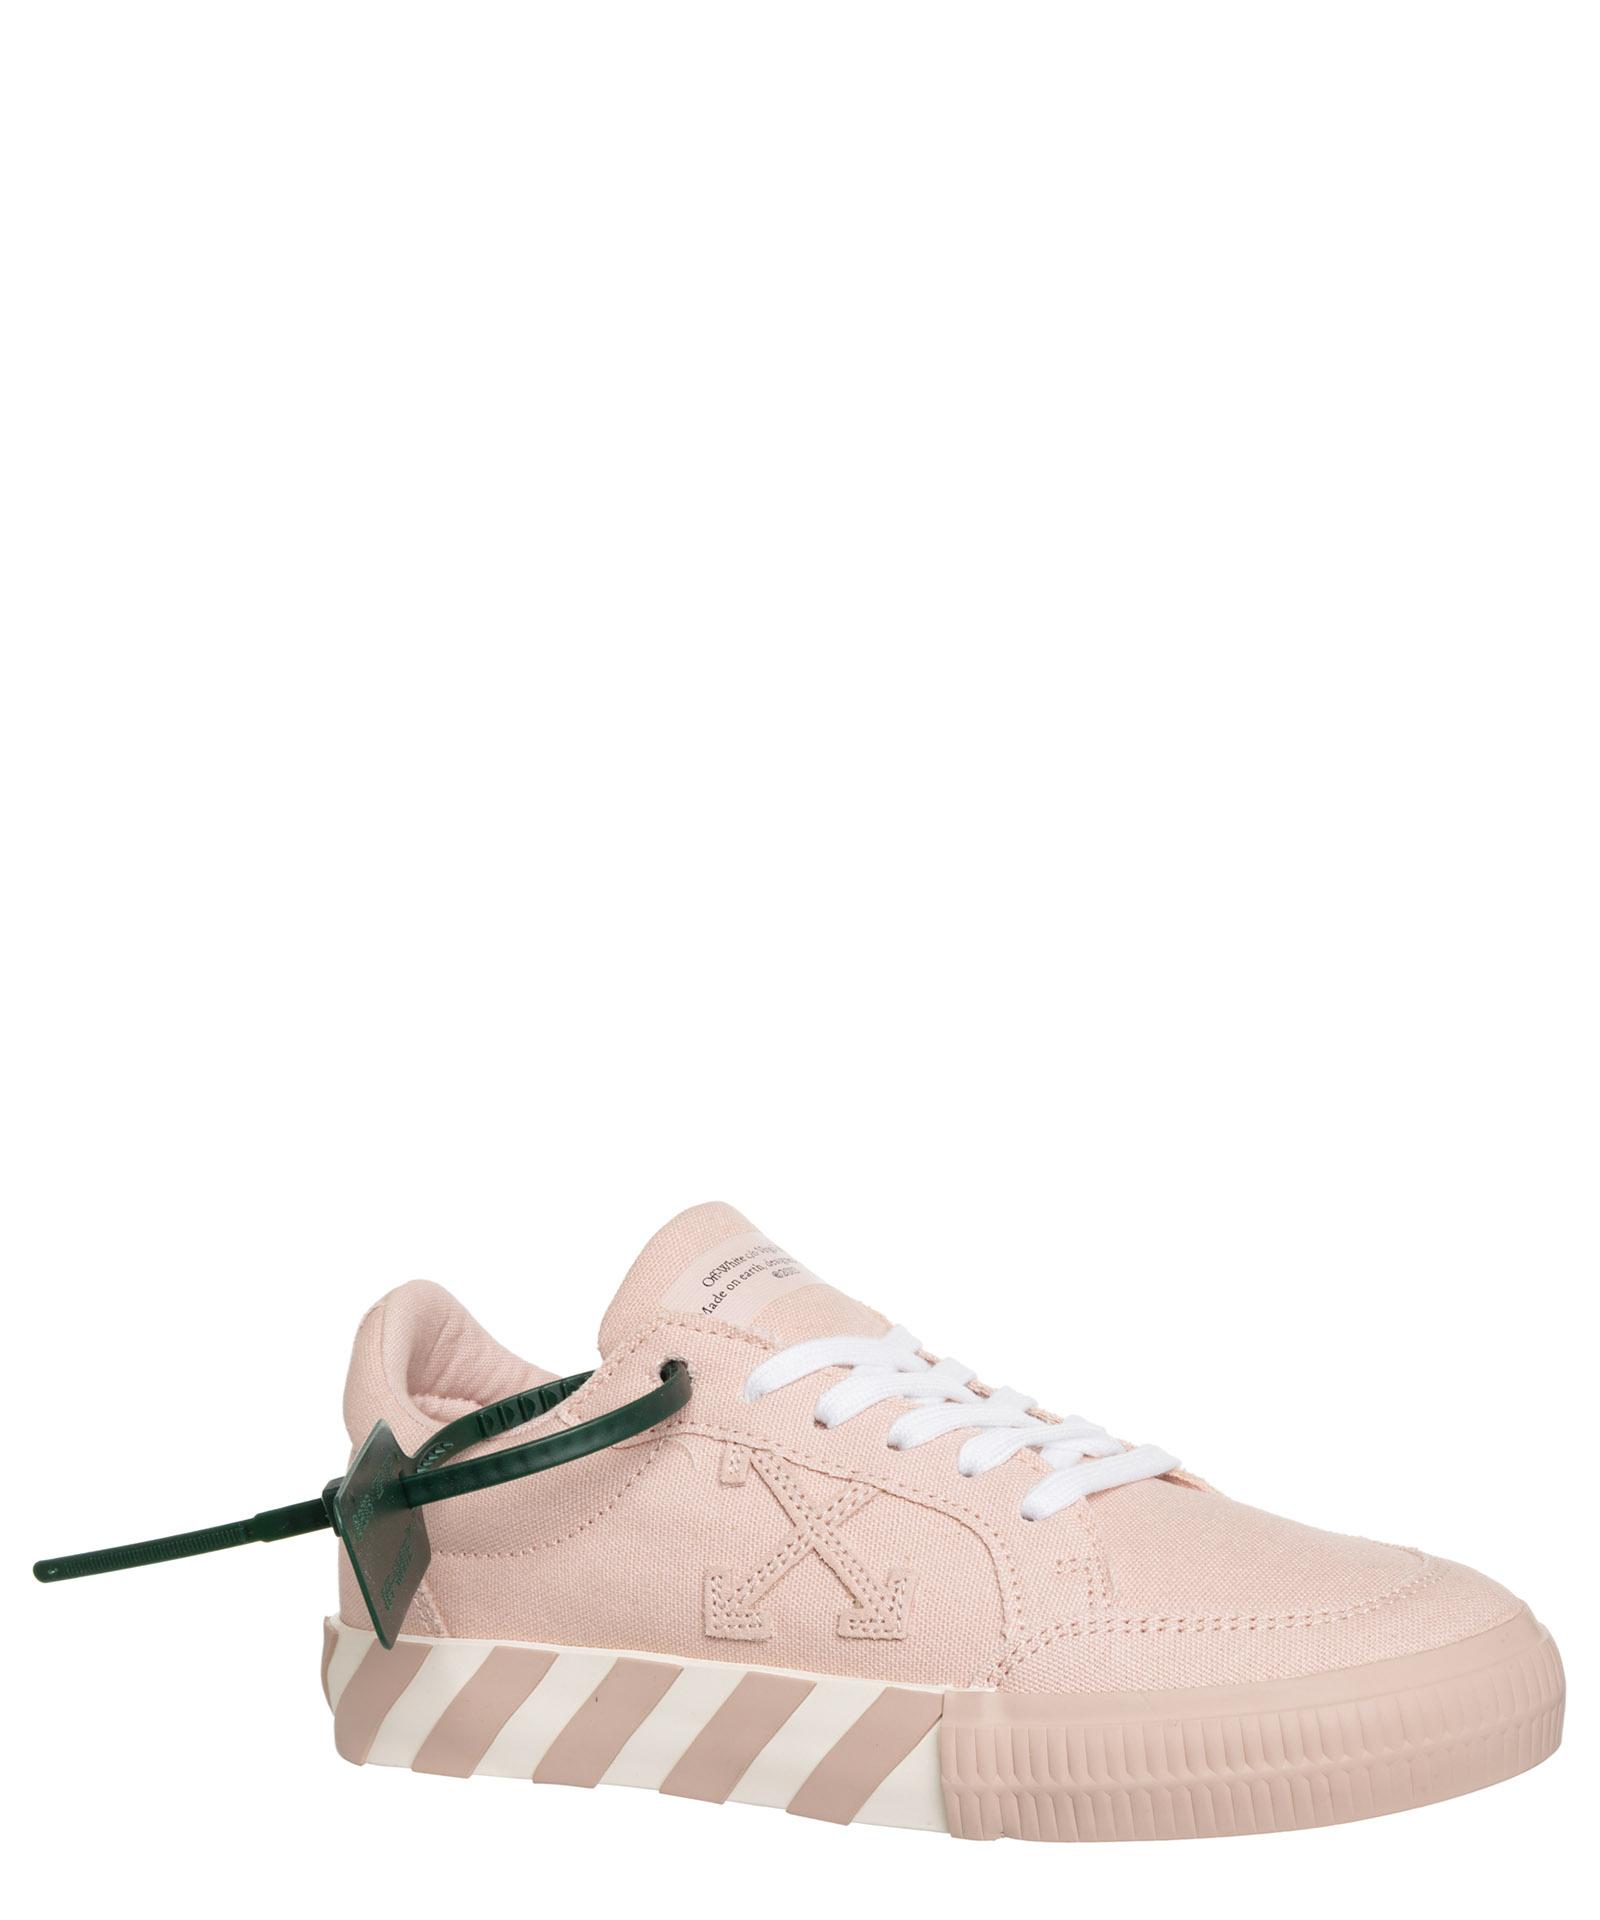 Off-White c/o Virgil Abloh Low Vulcanized Cotton Sneakers in Pink | Lyst